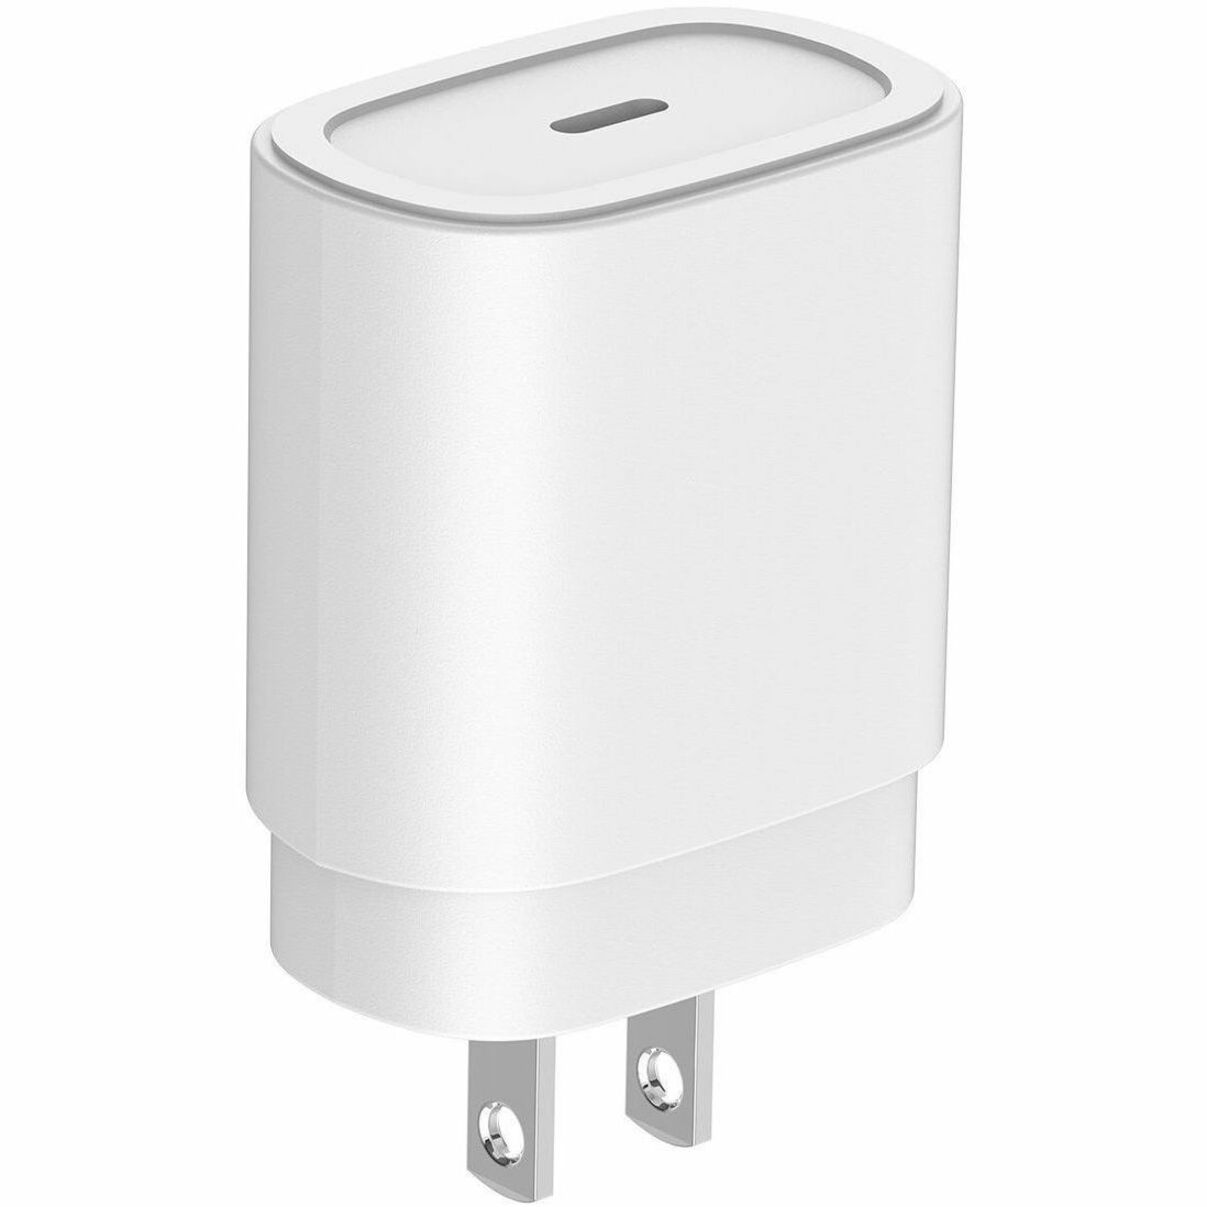 4XEM 4X20WCHARGER 25W USB-C Power Adapter, Fast Charging for iPhone, iPad, and Samsung Devices